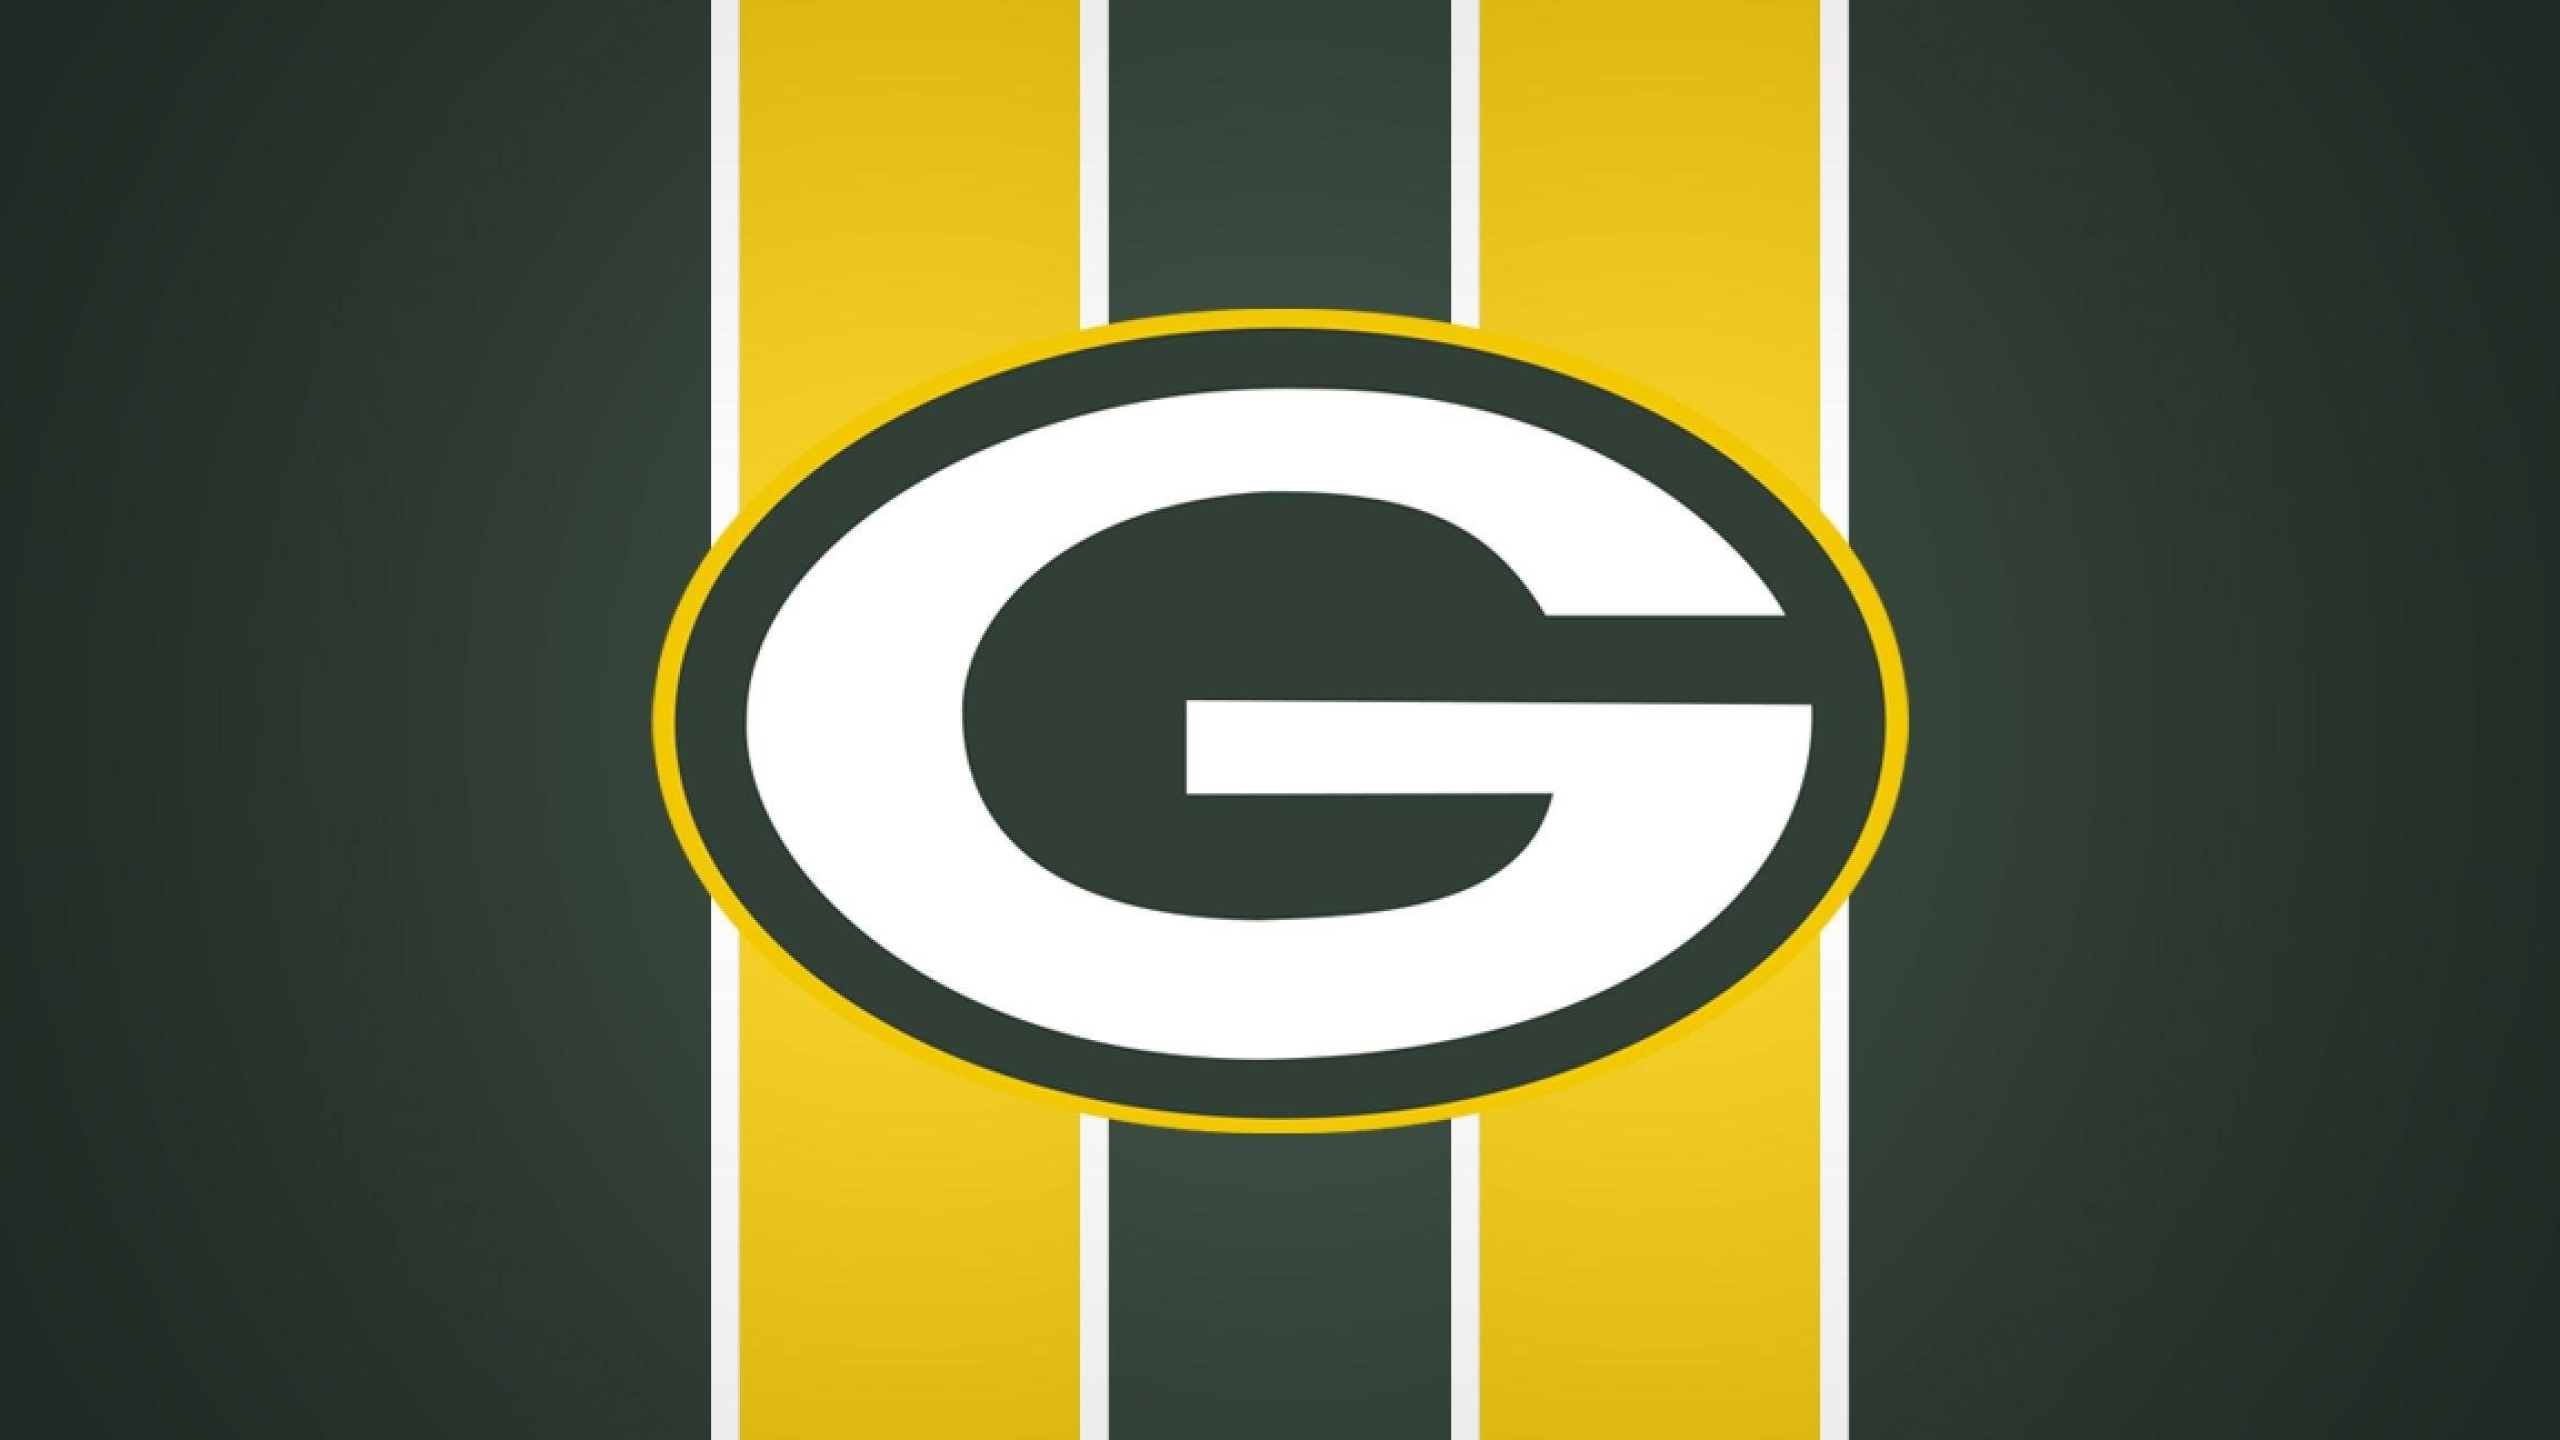 Green Bay Packers: The team has nine pre-Super Bowl NFL titles and four Super Bowl victories. 2560x1440 HD Wallpaper.